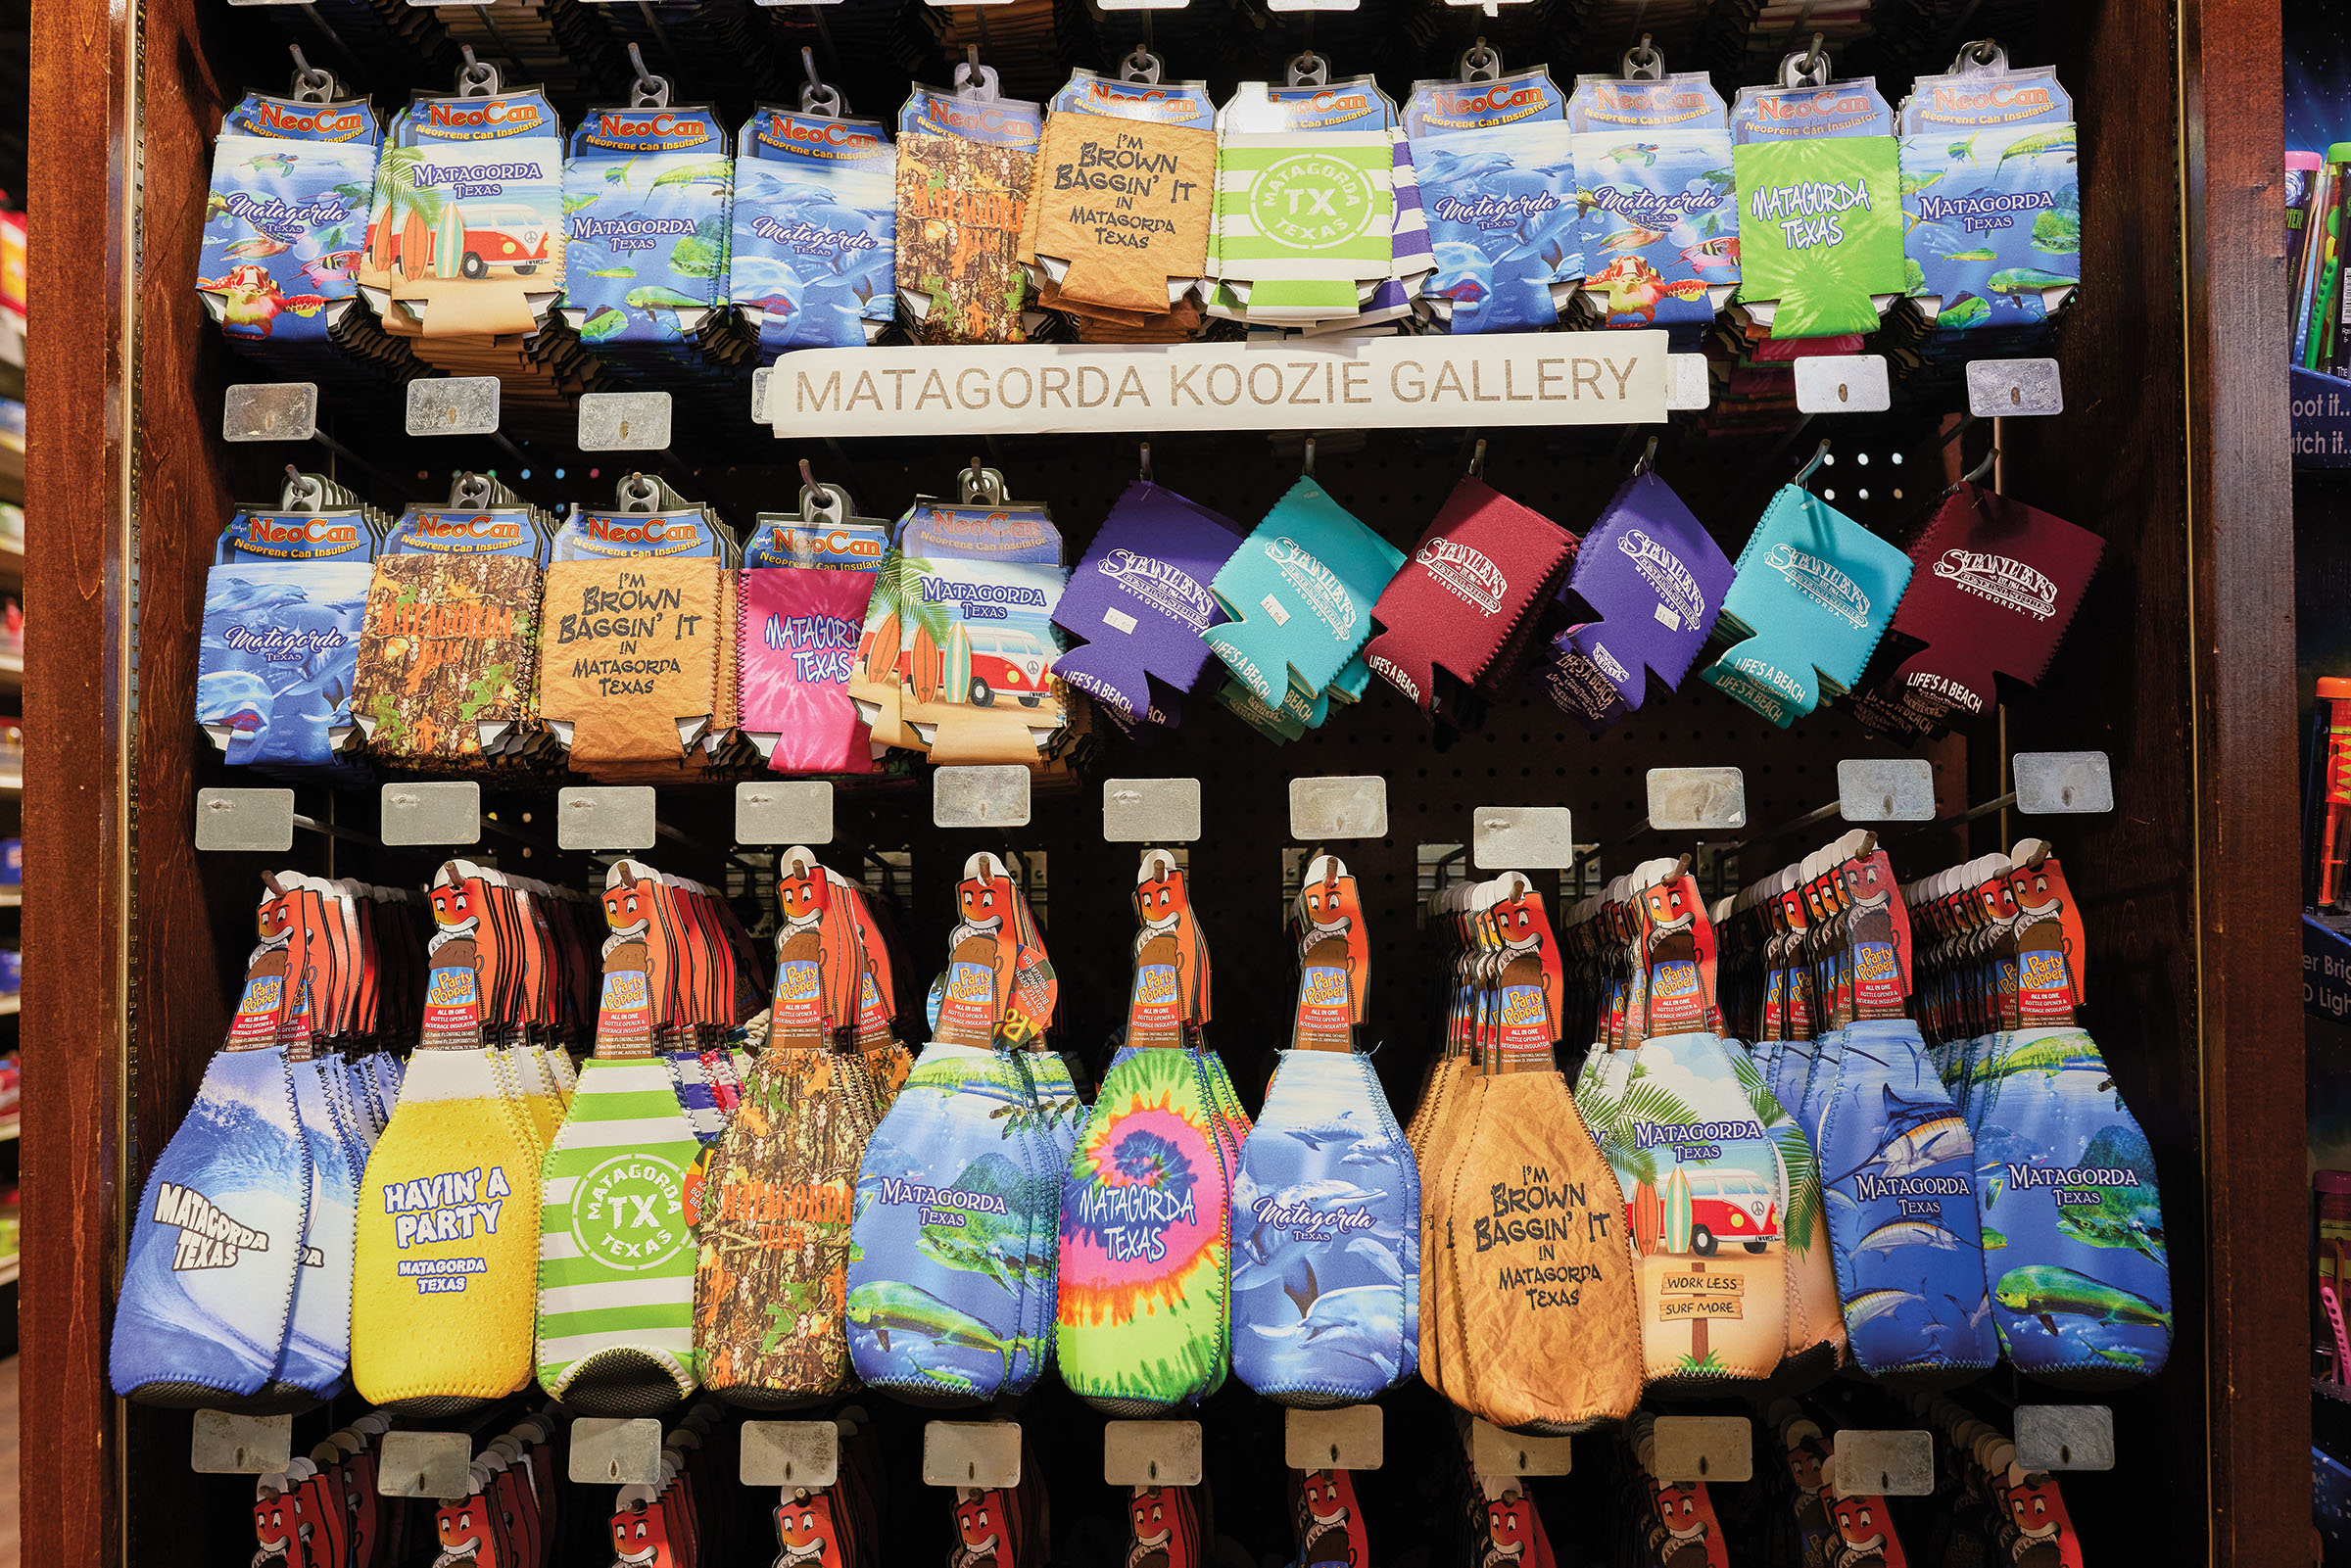 A display of brightly-colored items including koozies and socks in tie-dye saying Matagorda